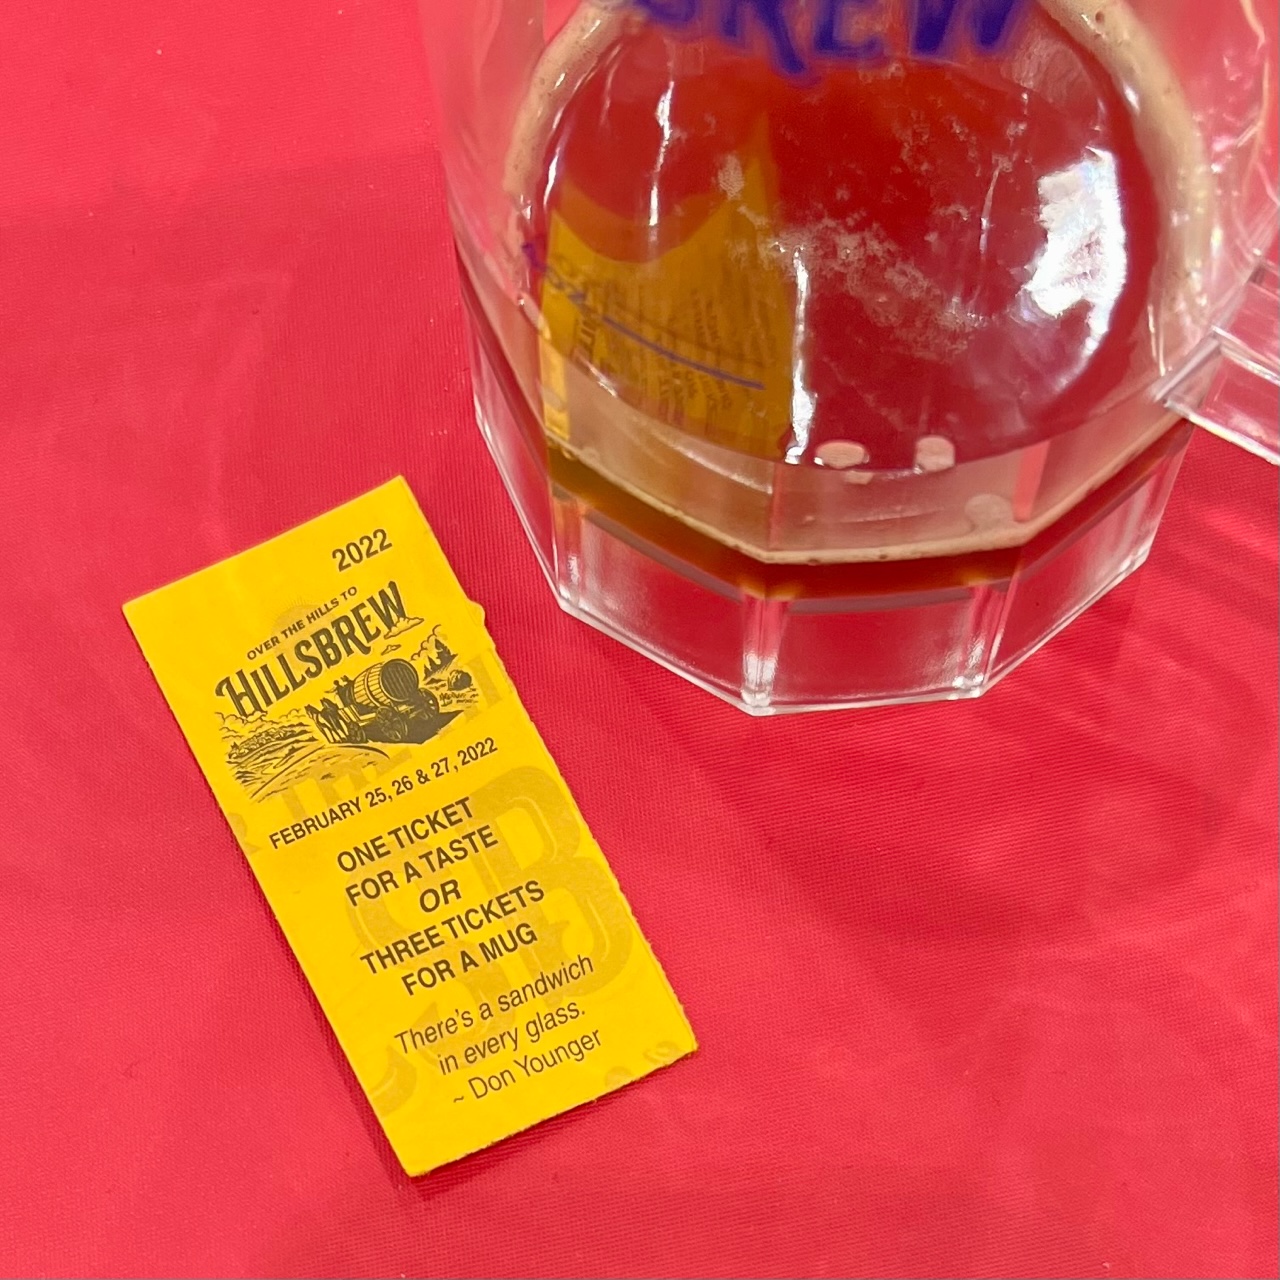 A lovely saying from the late Don Younger - There's a sandwich in every glass. - is printed on every tasting ticket at the 2022 Hillsbrew Fest.